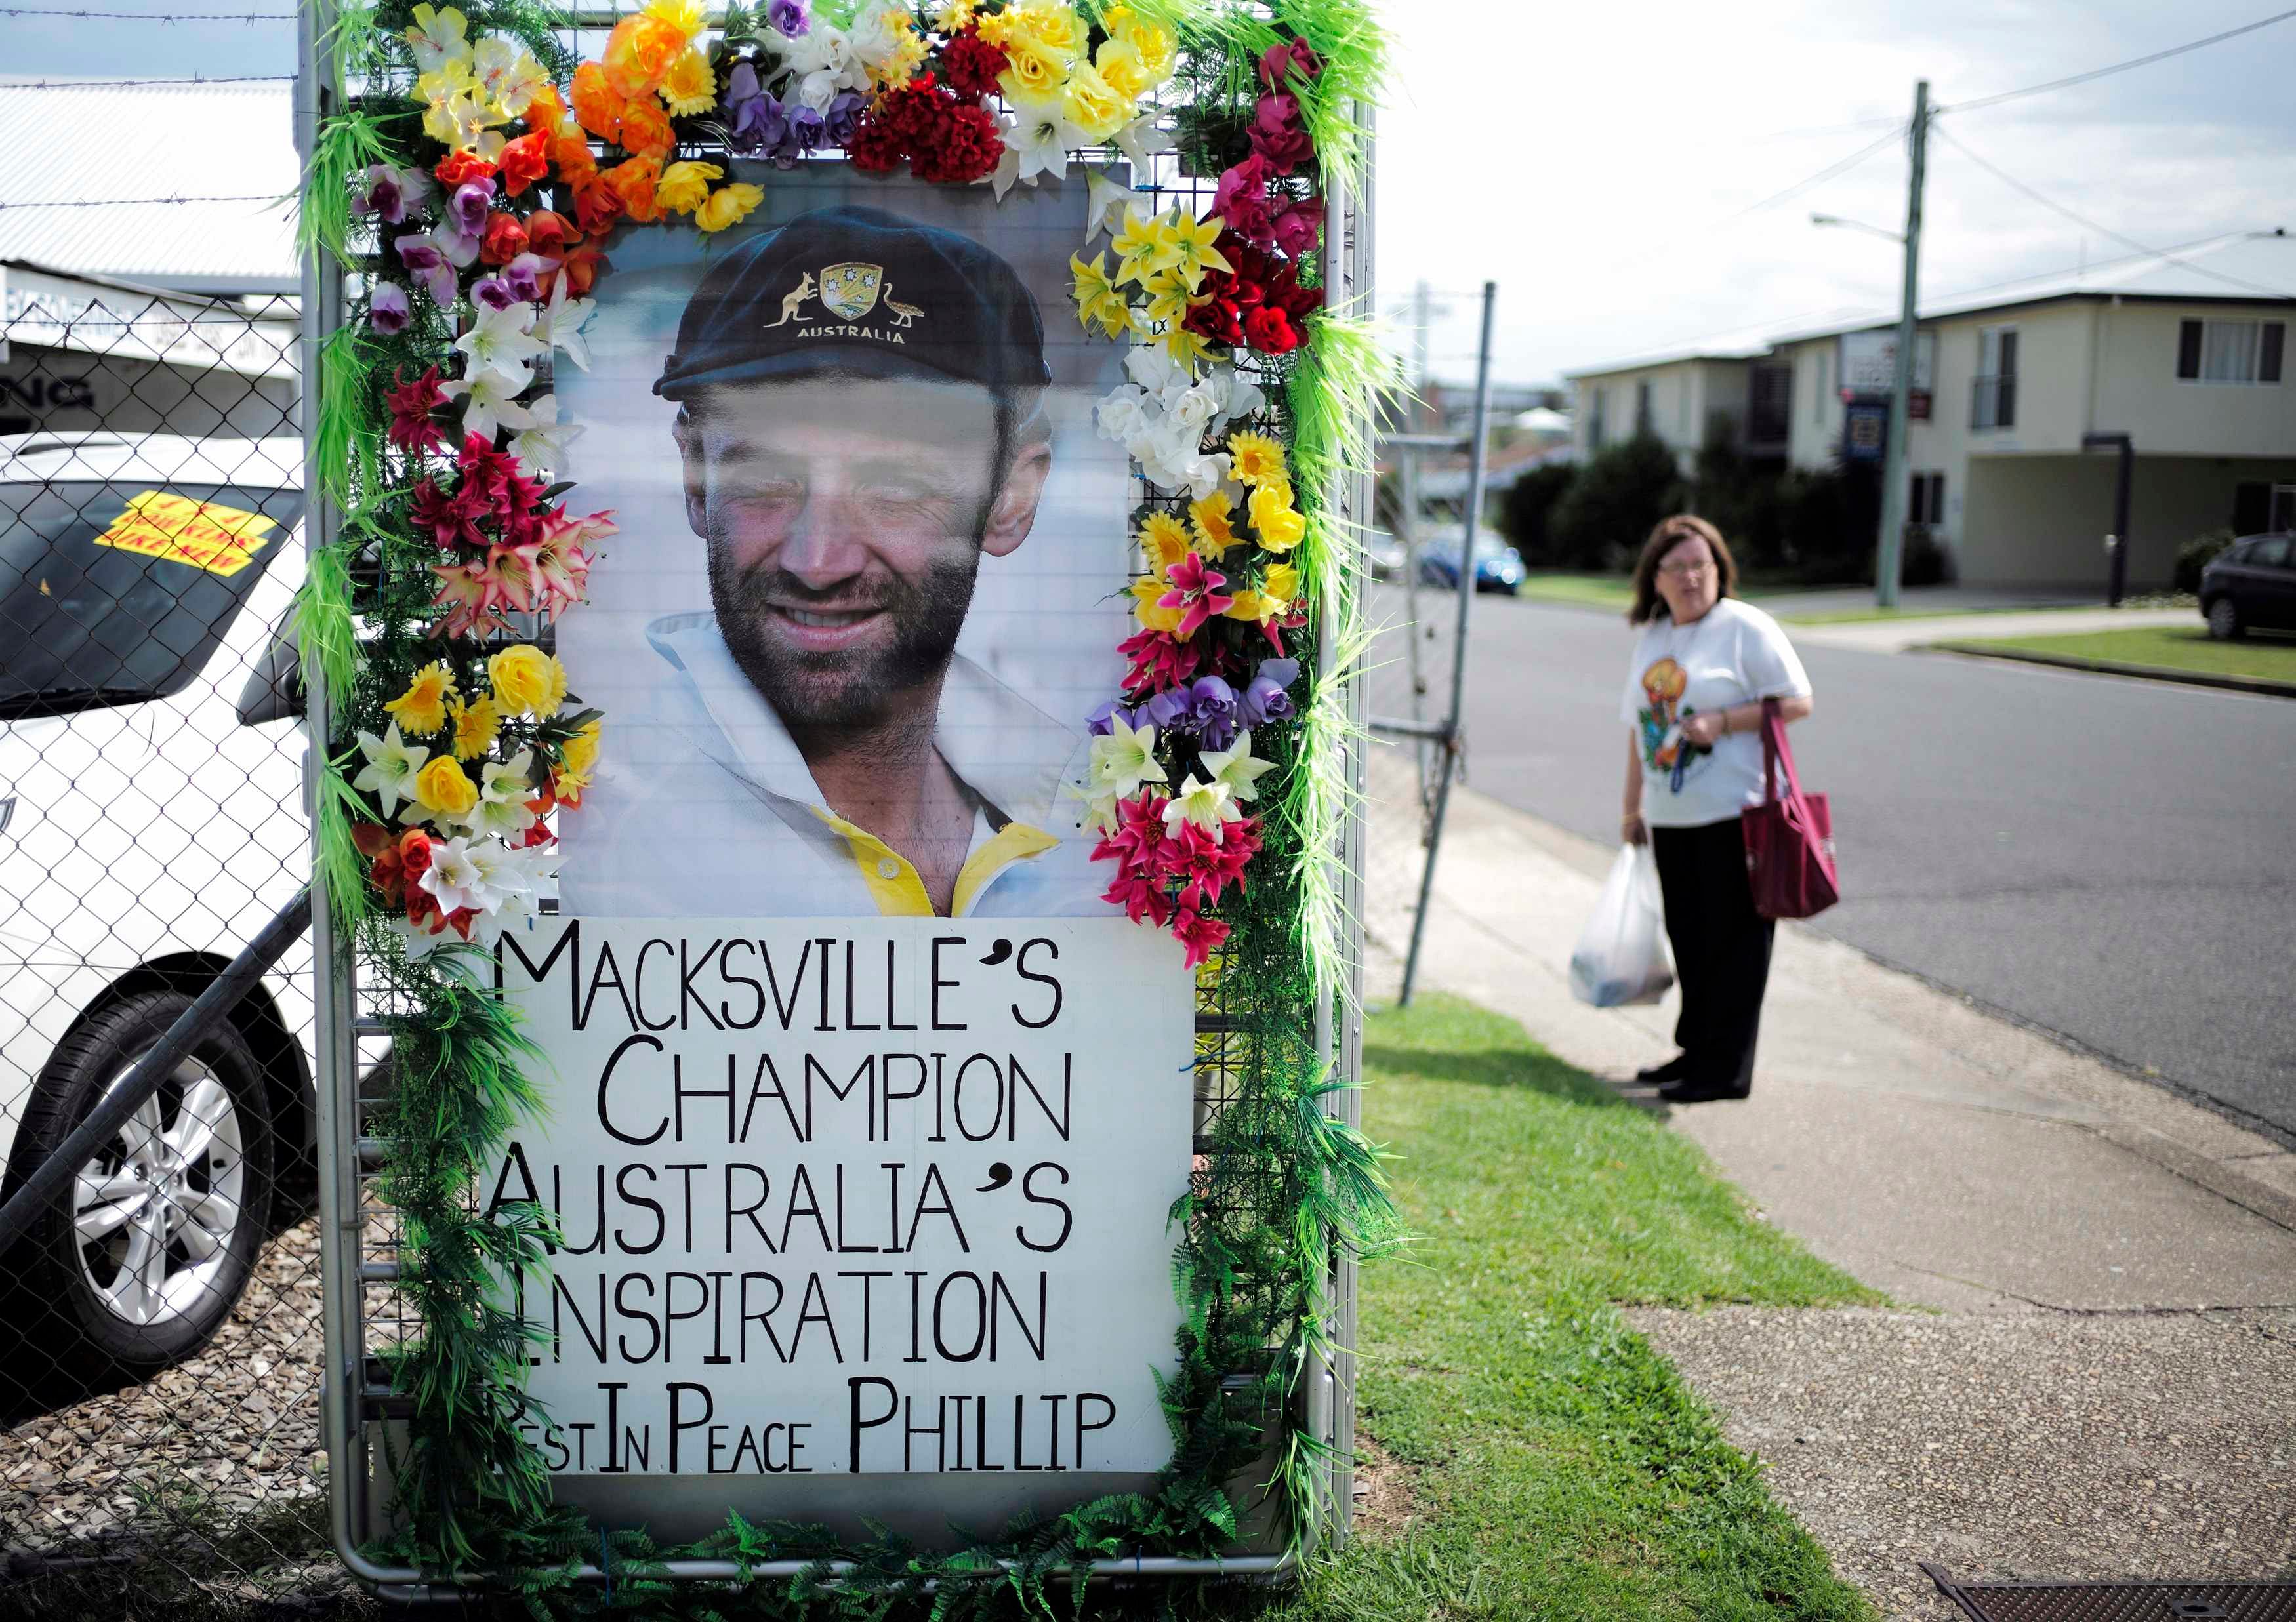 A local resident is pictured alongside a tribute to deceased Australian cricketer Phillip Hughes as his hometown prepares for his funeral in Macksville December 2, 2014. Photo: Reuters